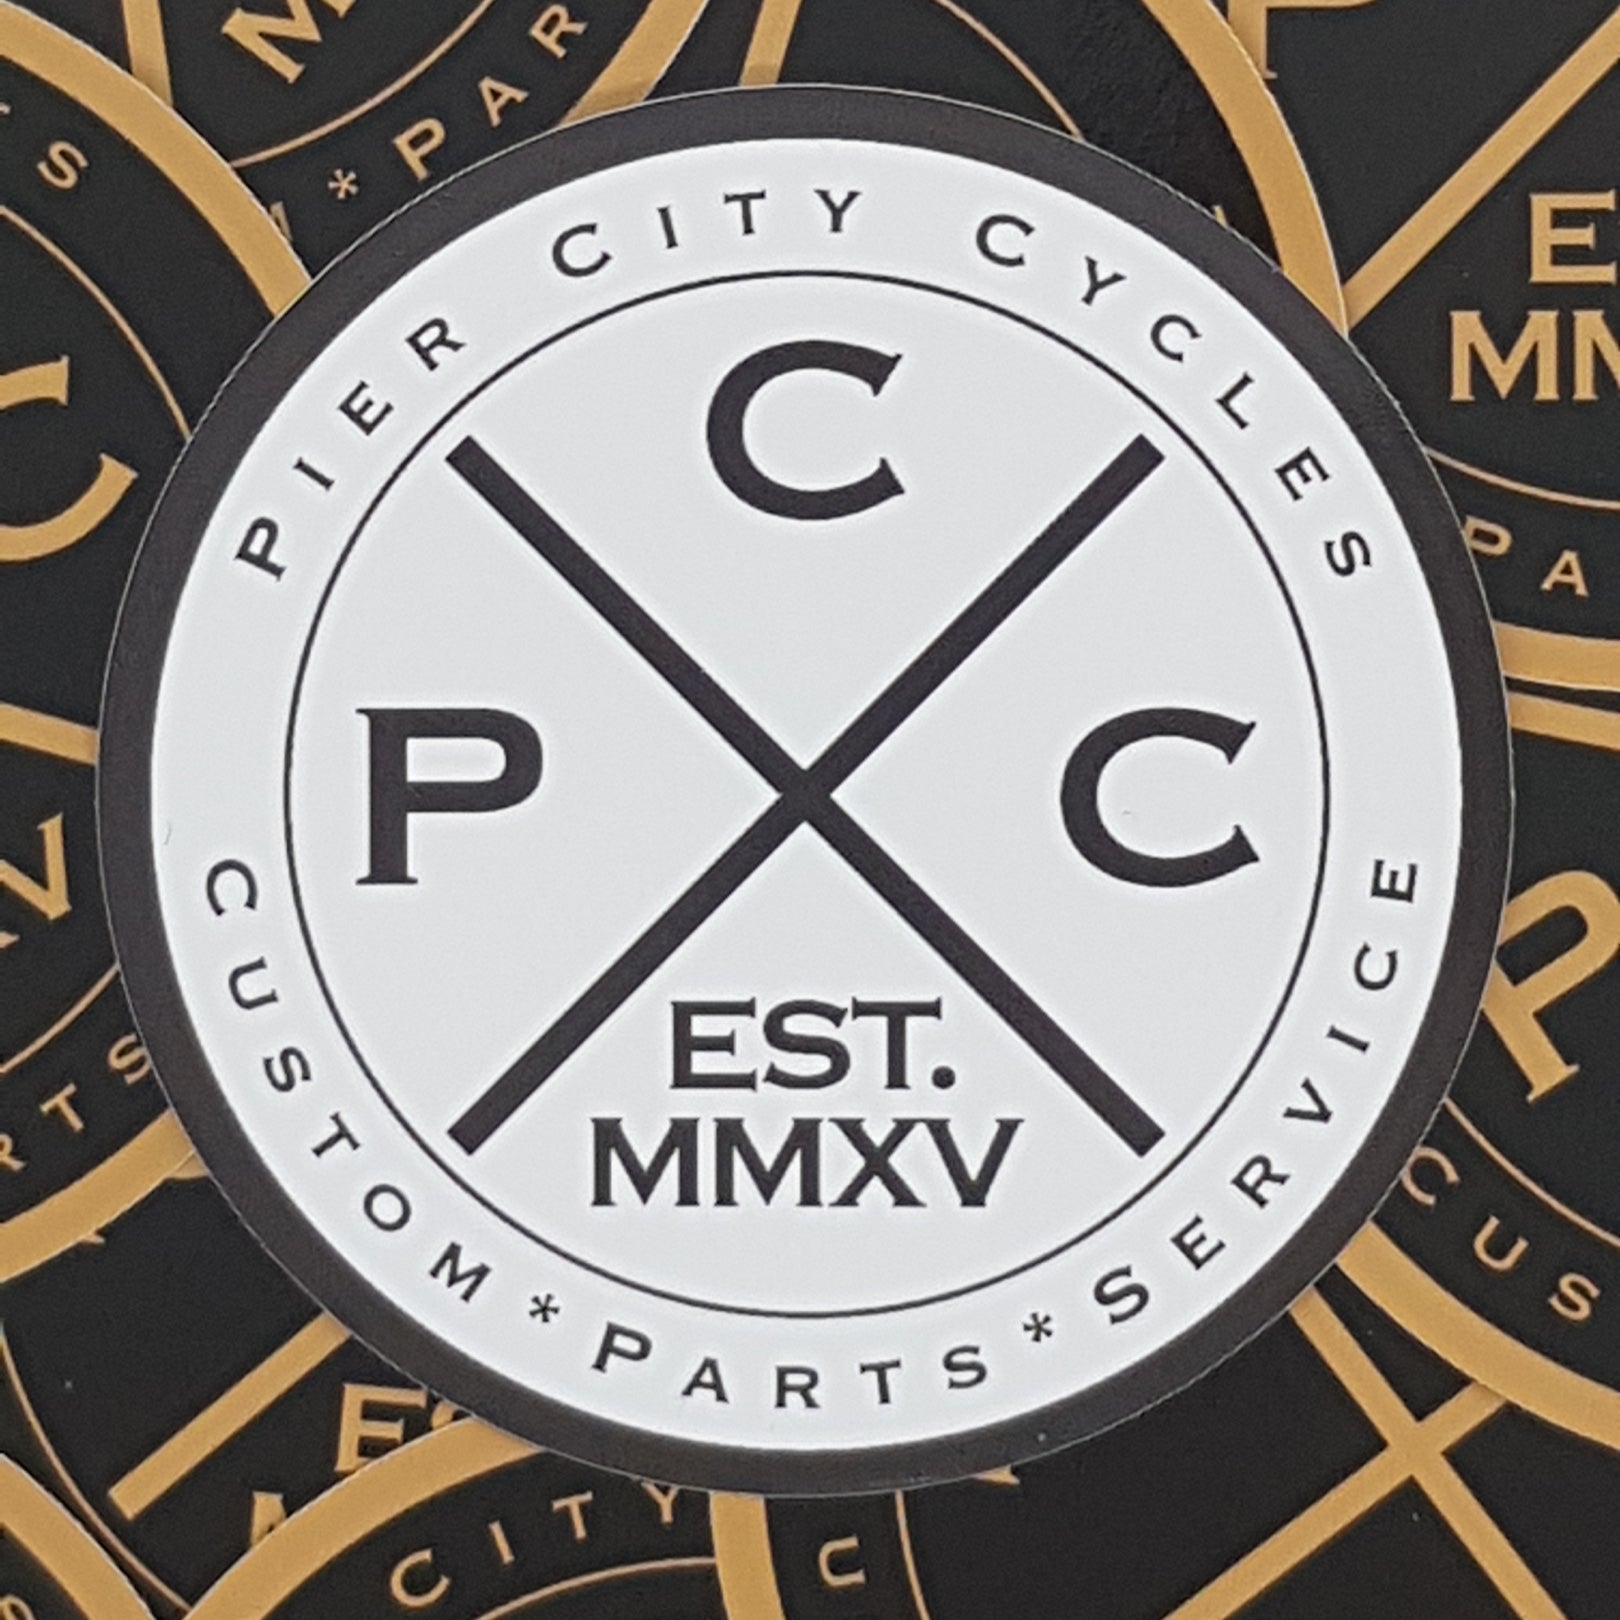 pier city cycles